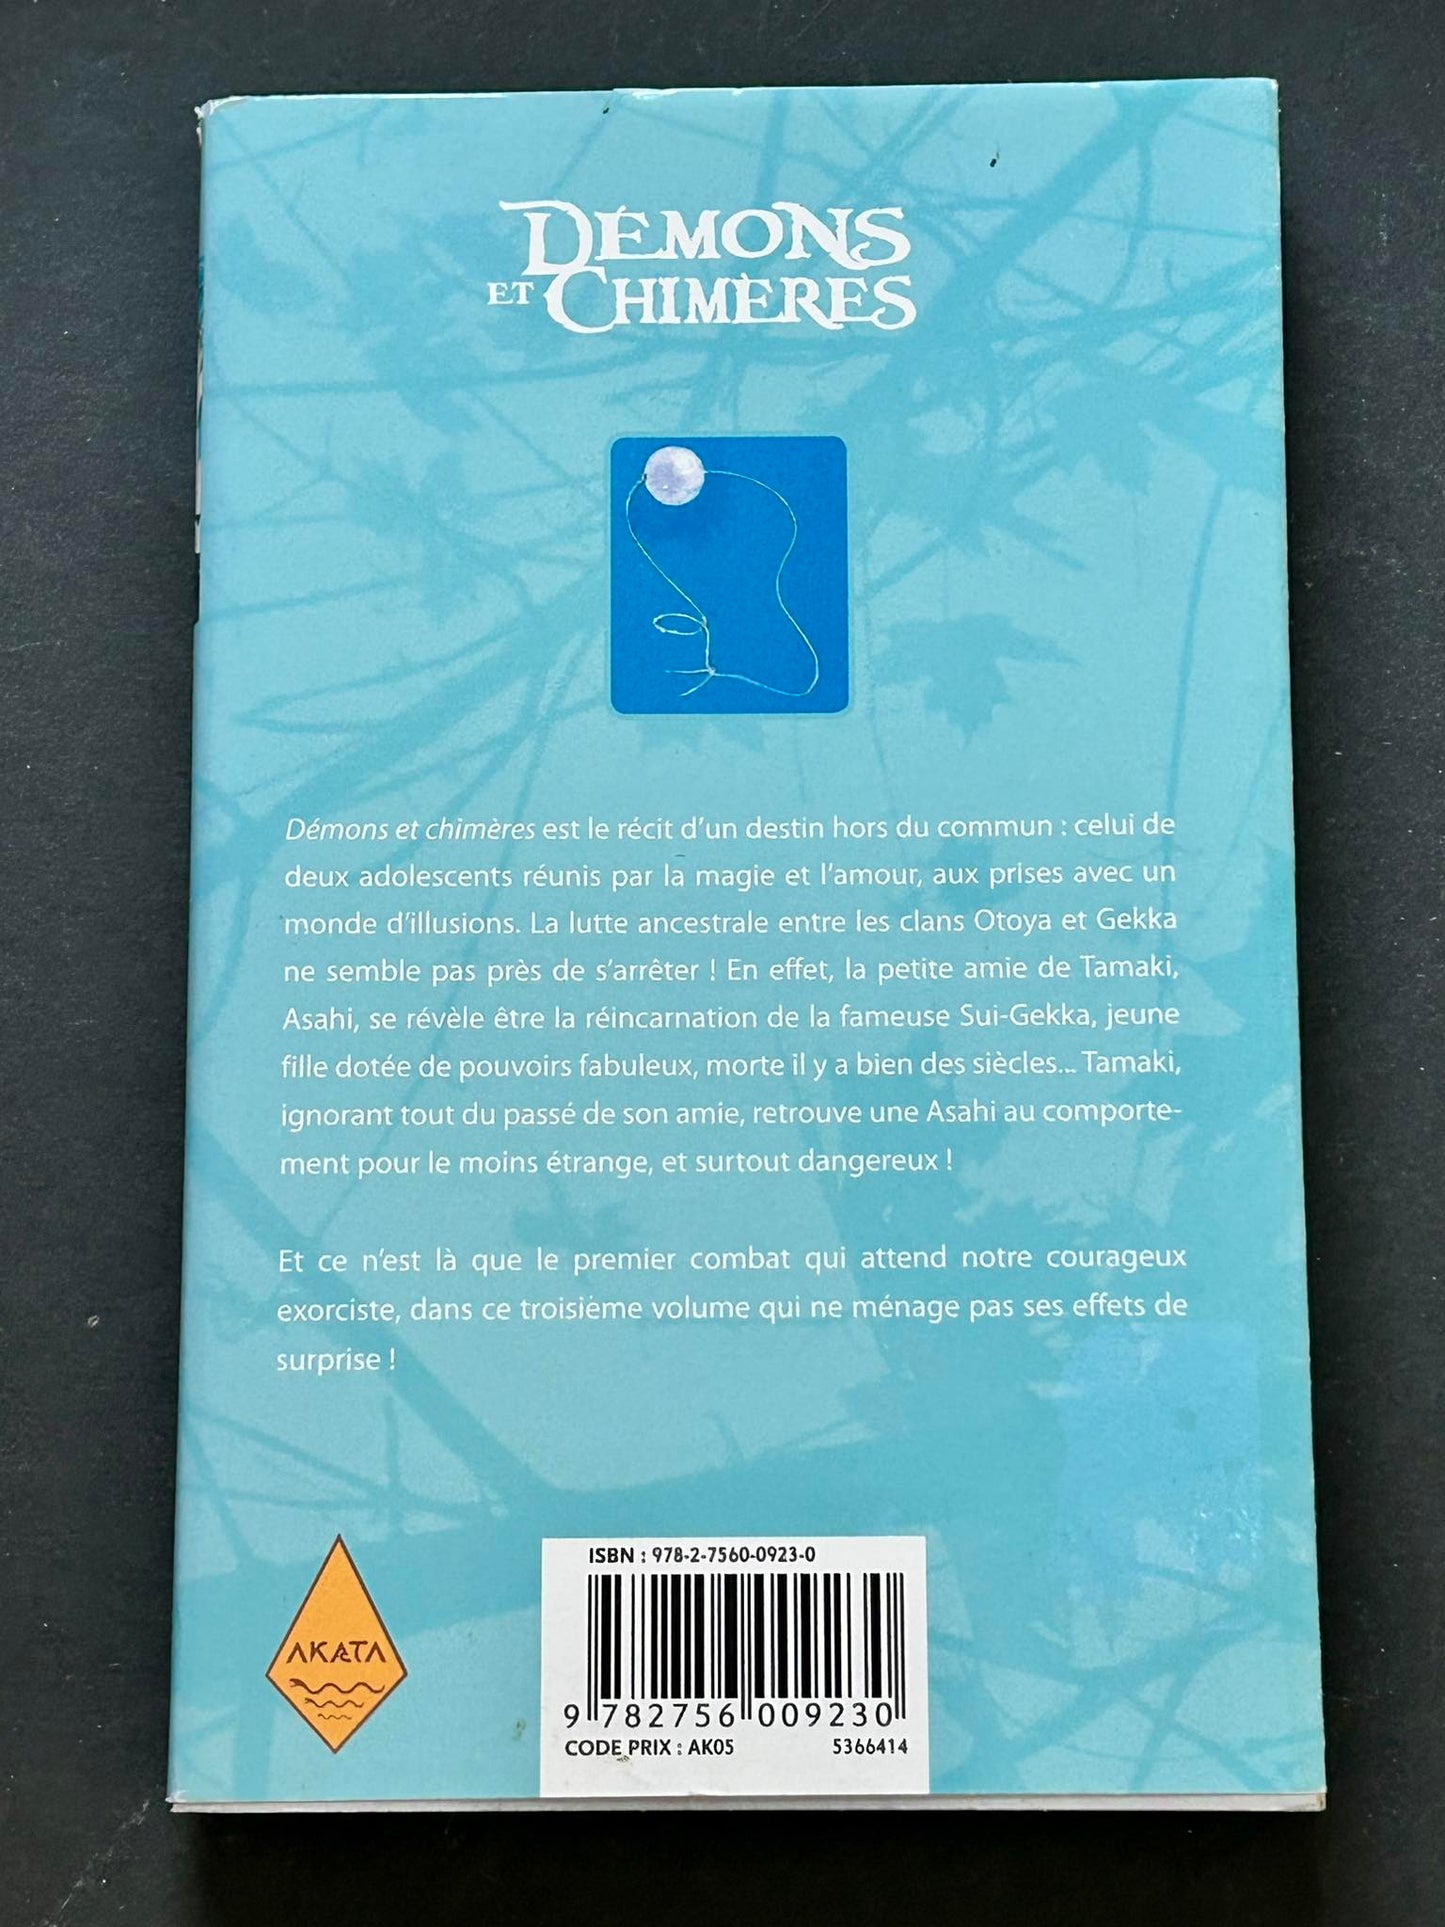 Demons and Chimeras, volume 3